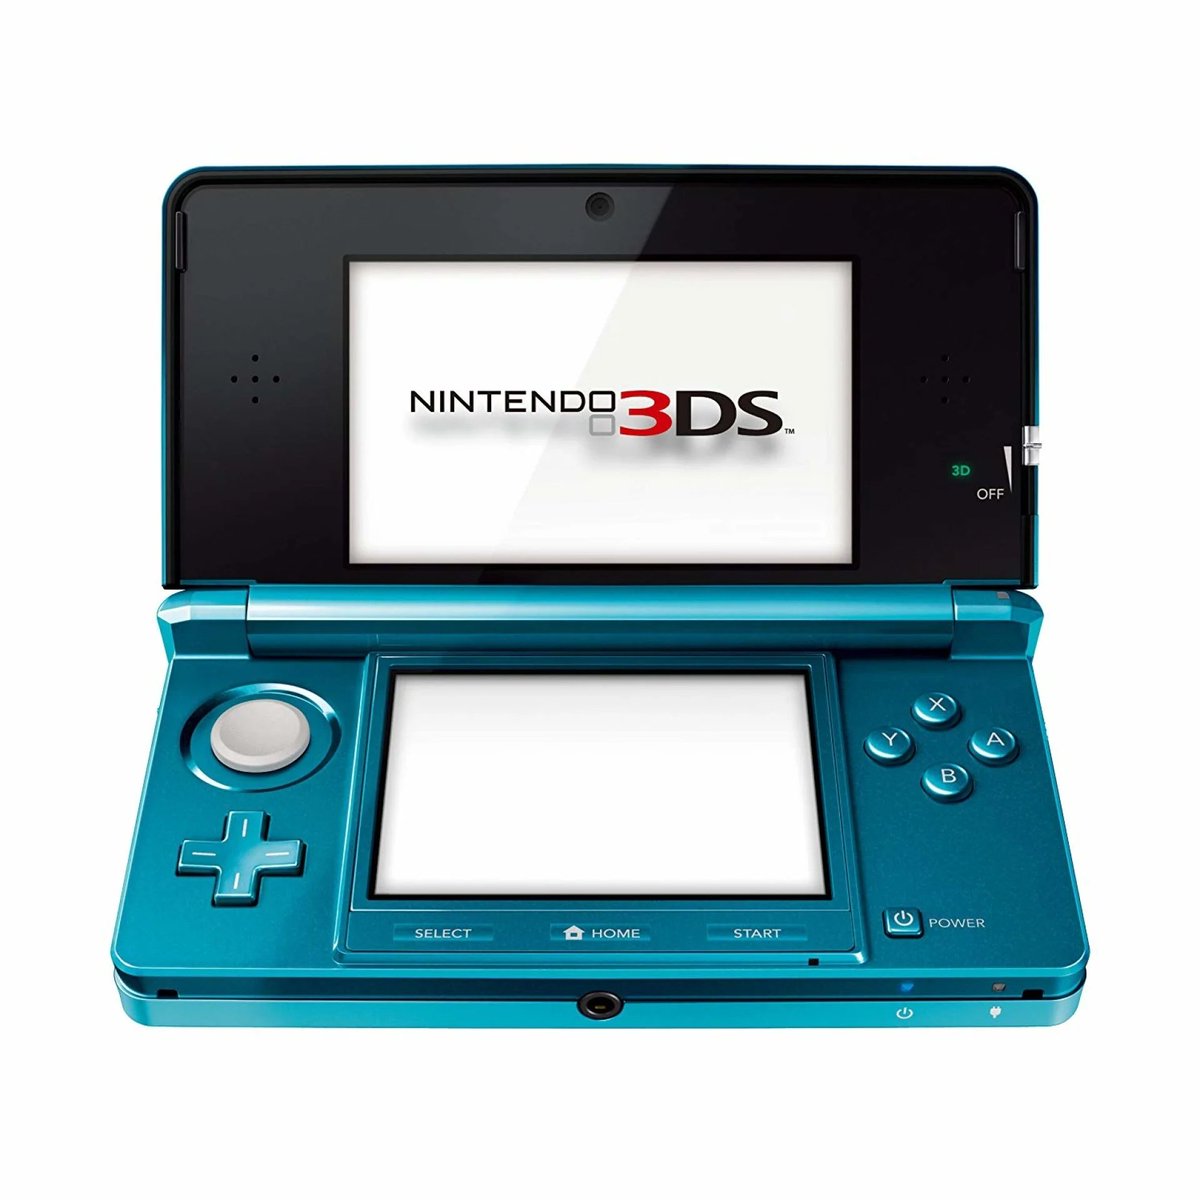 The Nintendo 3DS was first released 13 years ago today in North America. Which was your favorite 3DS game?